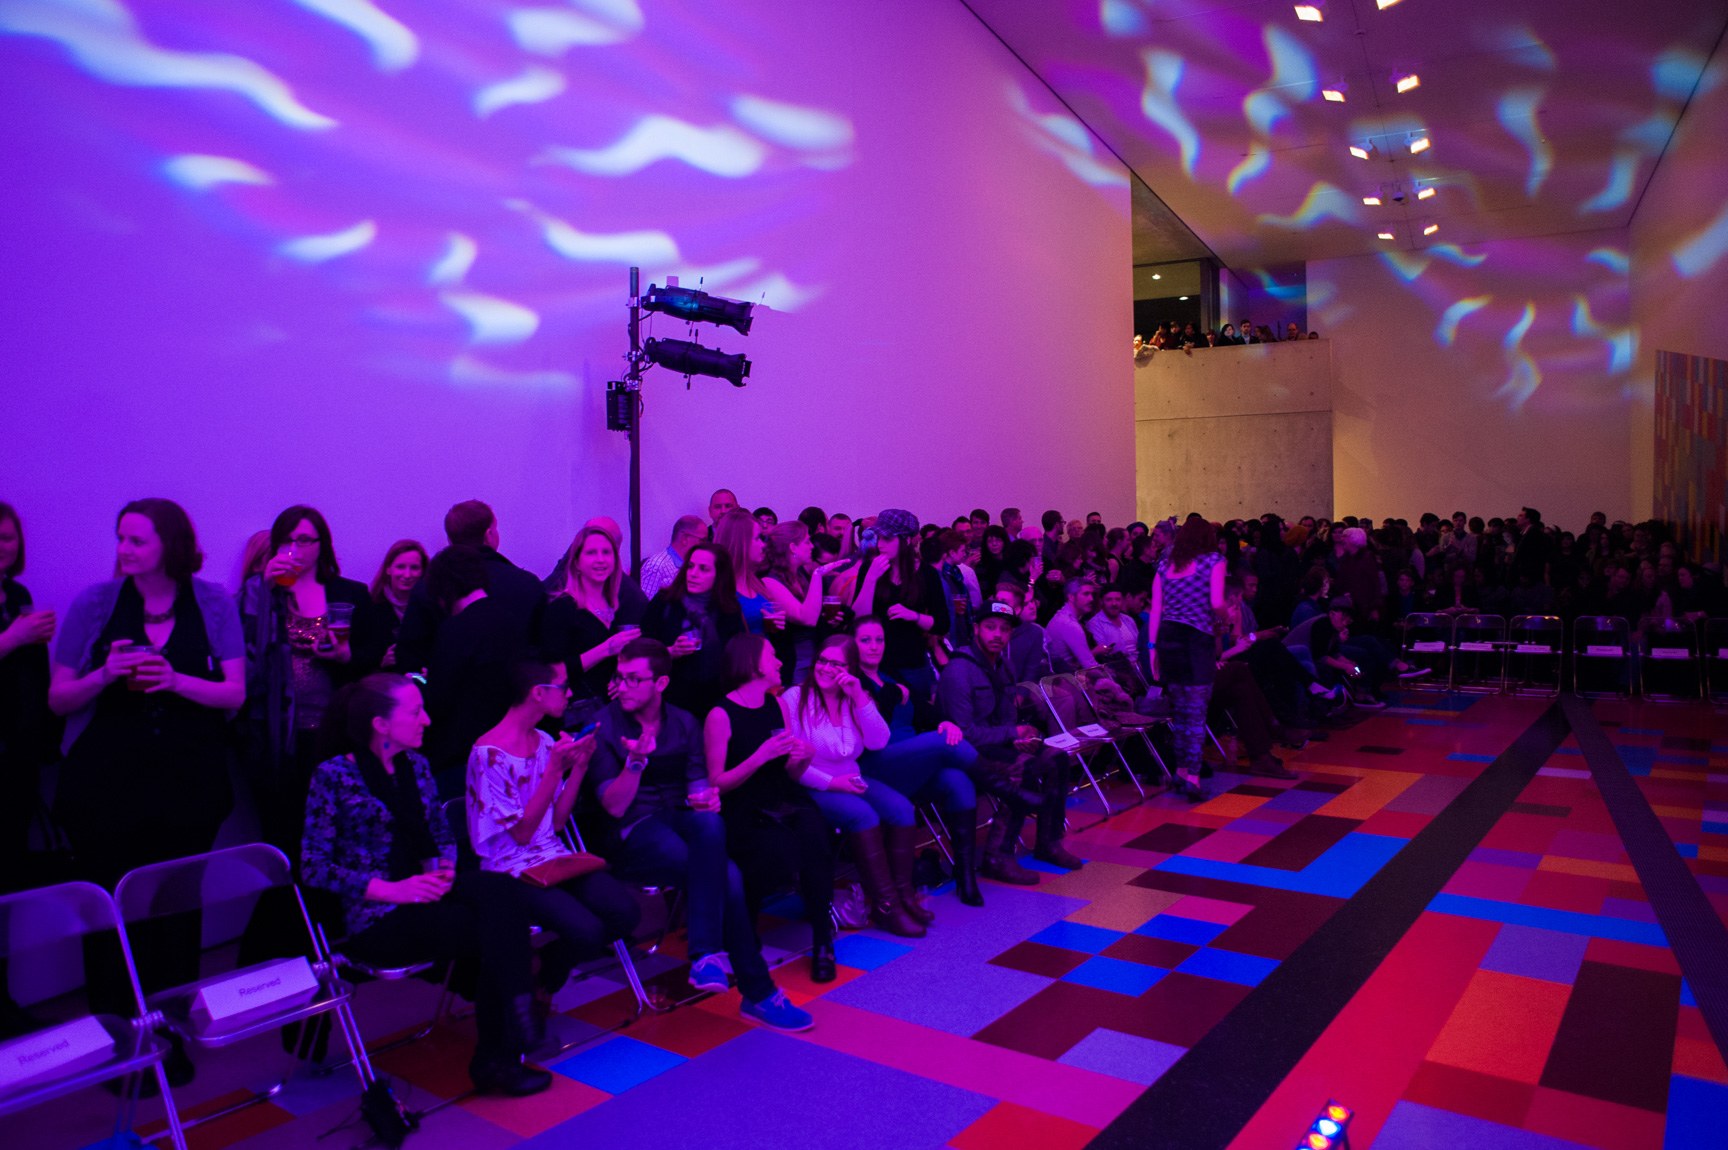 A large audience crowds the runway in the Main Gallery, bathed in purple and blue light.